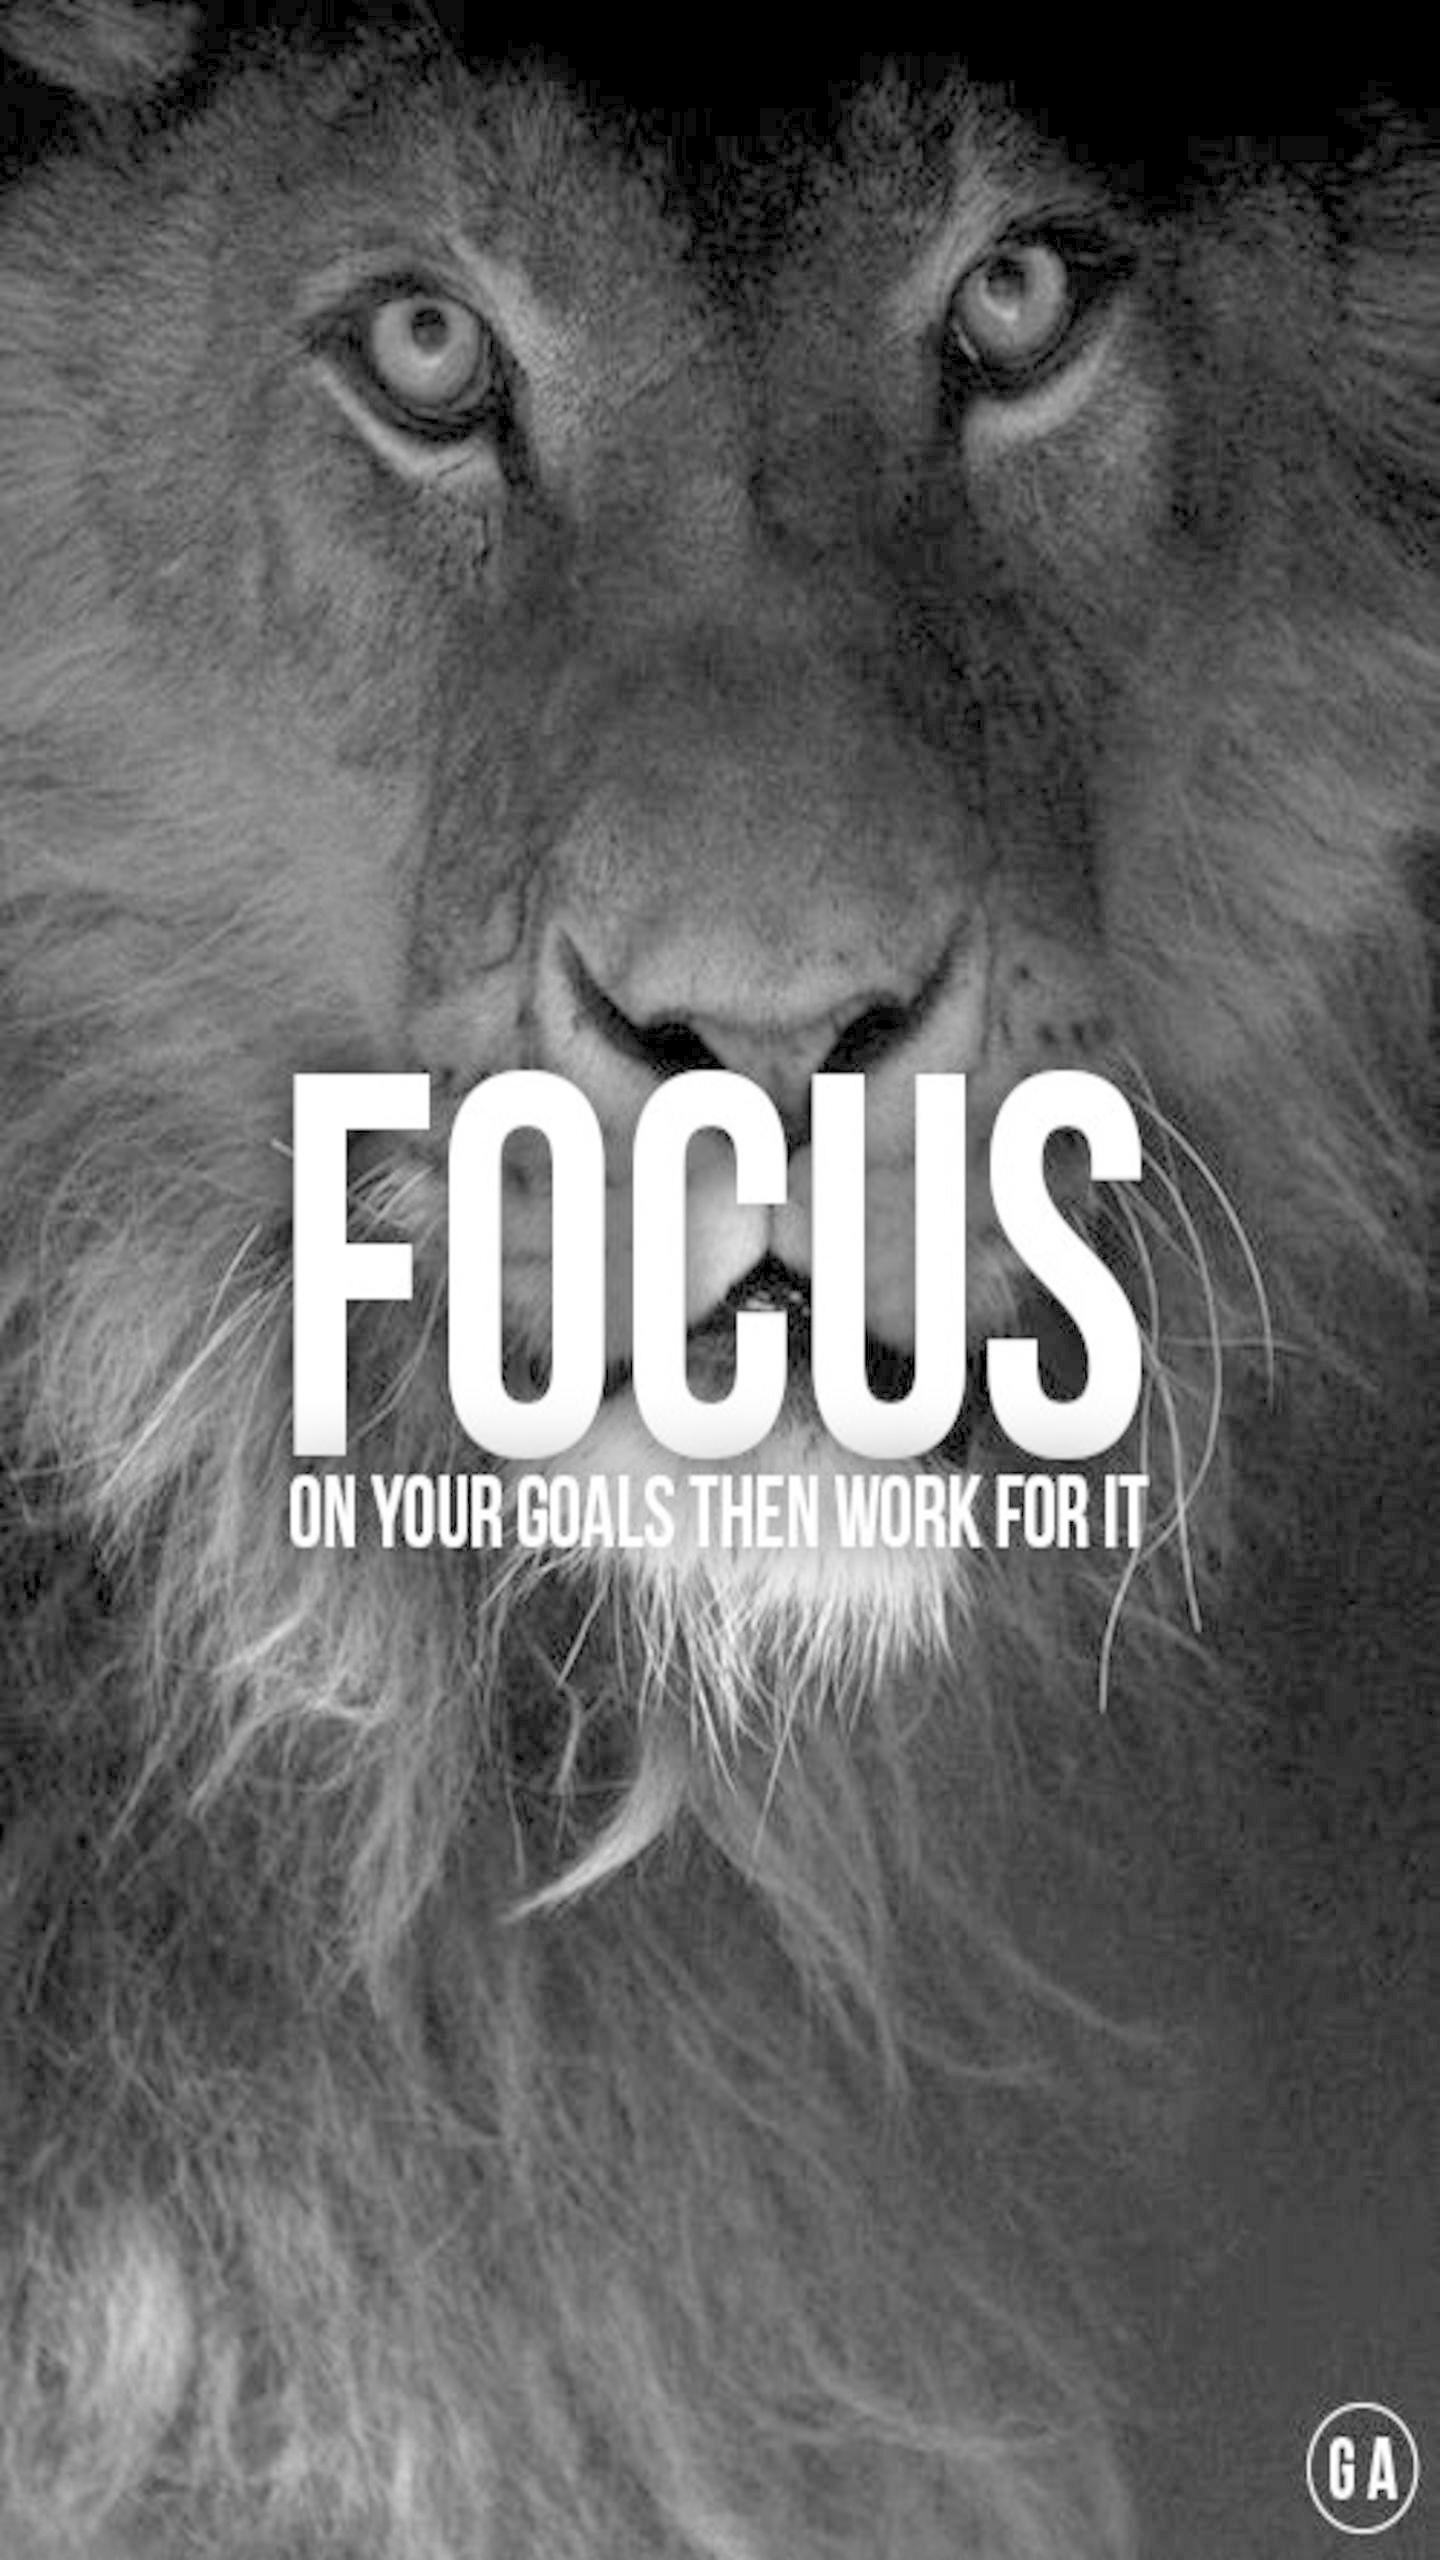 Focus Quotes Wallpapers - Wallpaper Cave